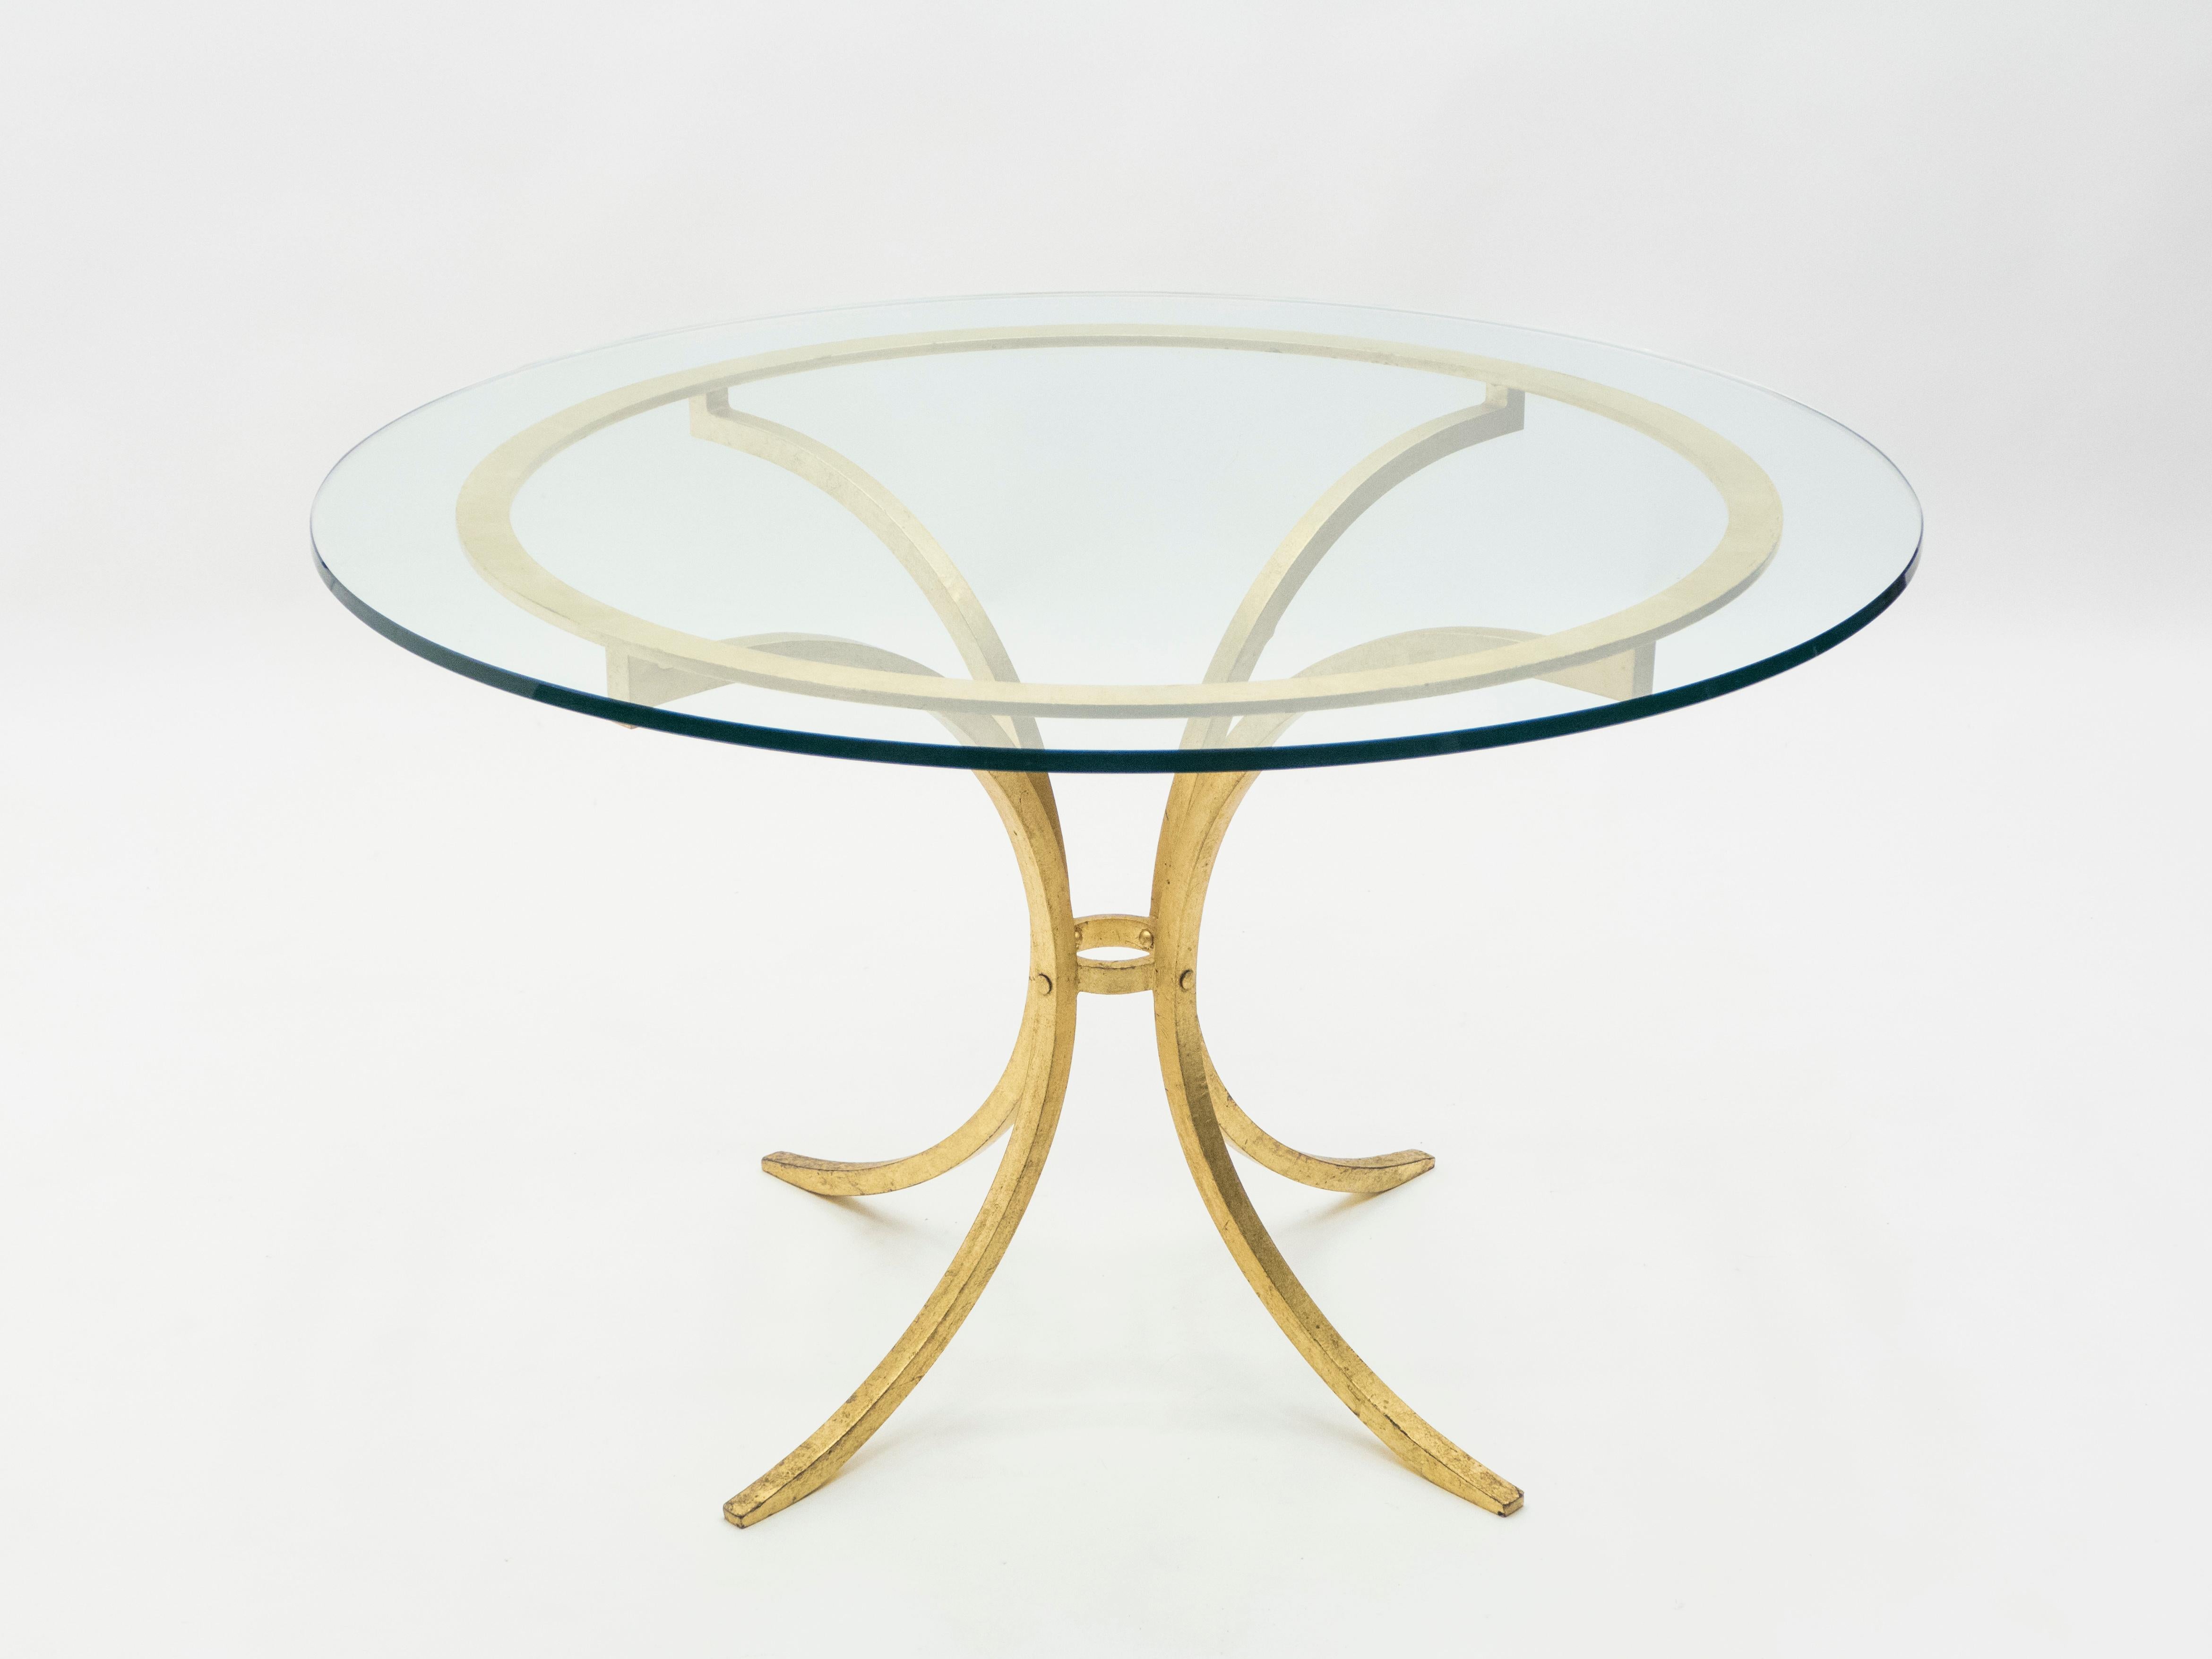 A strategically sparse design with high quality materials gives this dining table a sturdy yet delicate appeal. Wrought iron has been gilded with gold leaf for a gentle warm golden patina throughout the entire structure. A thick transparent glass